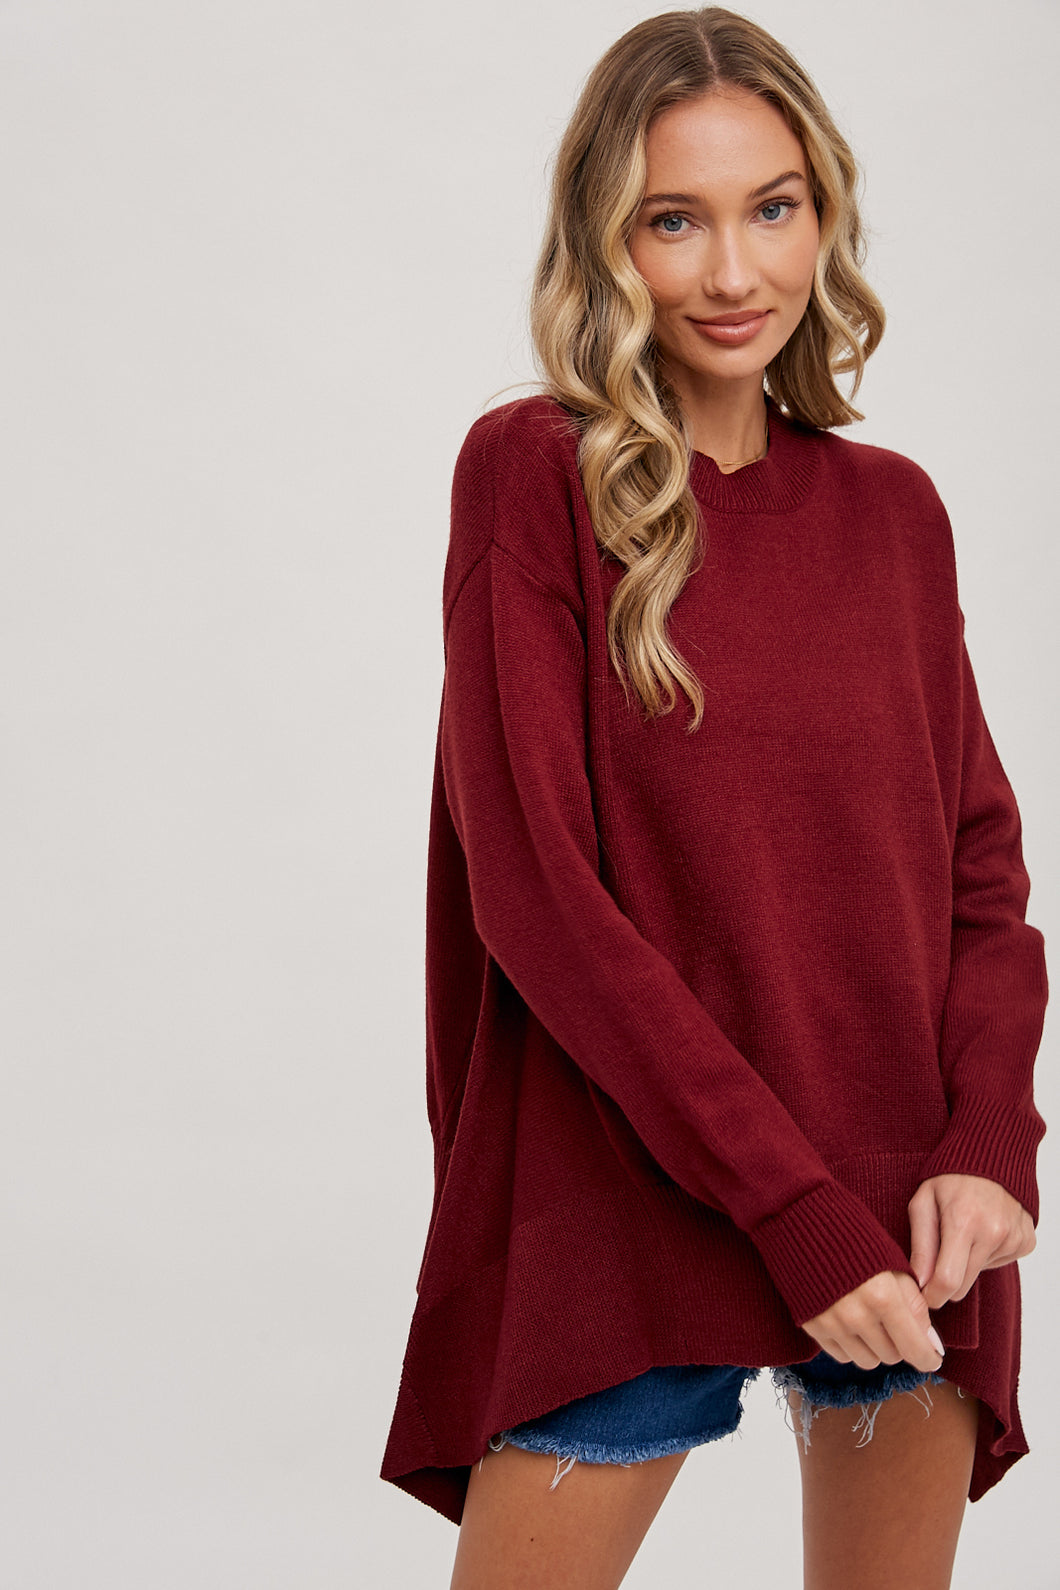 The Bella Throw Over Sweater in Burgundy